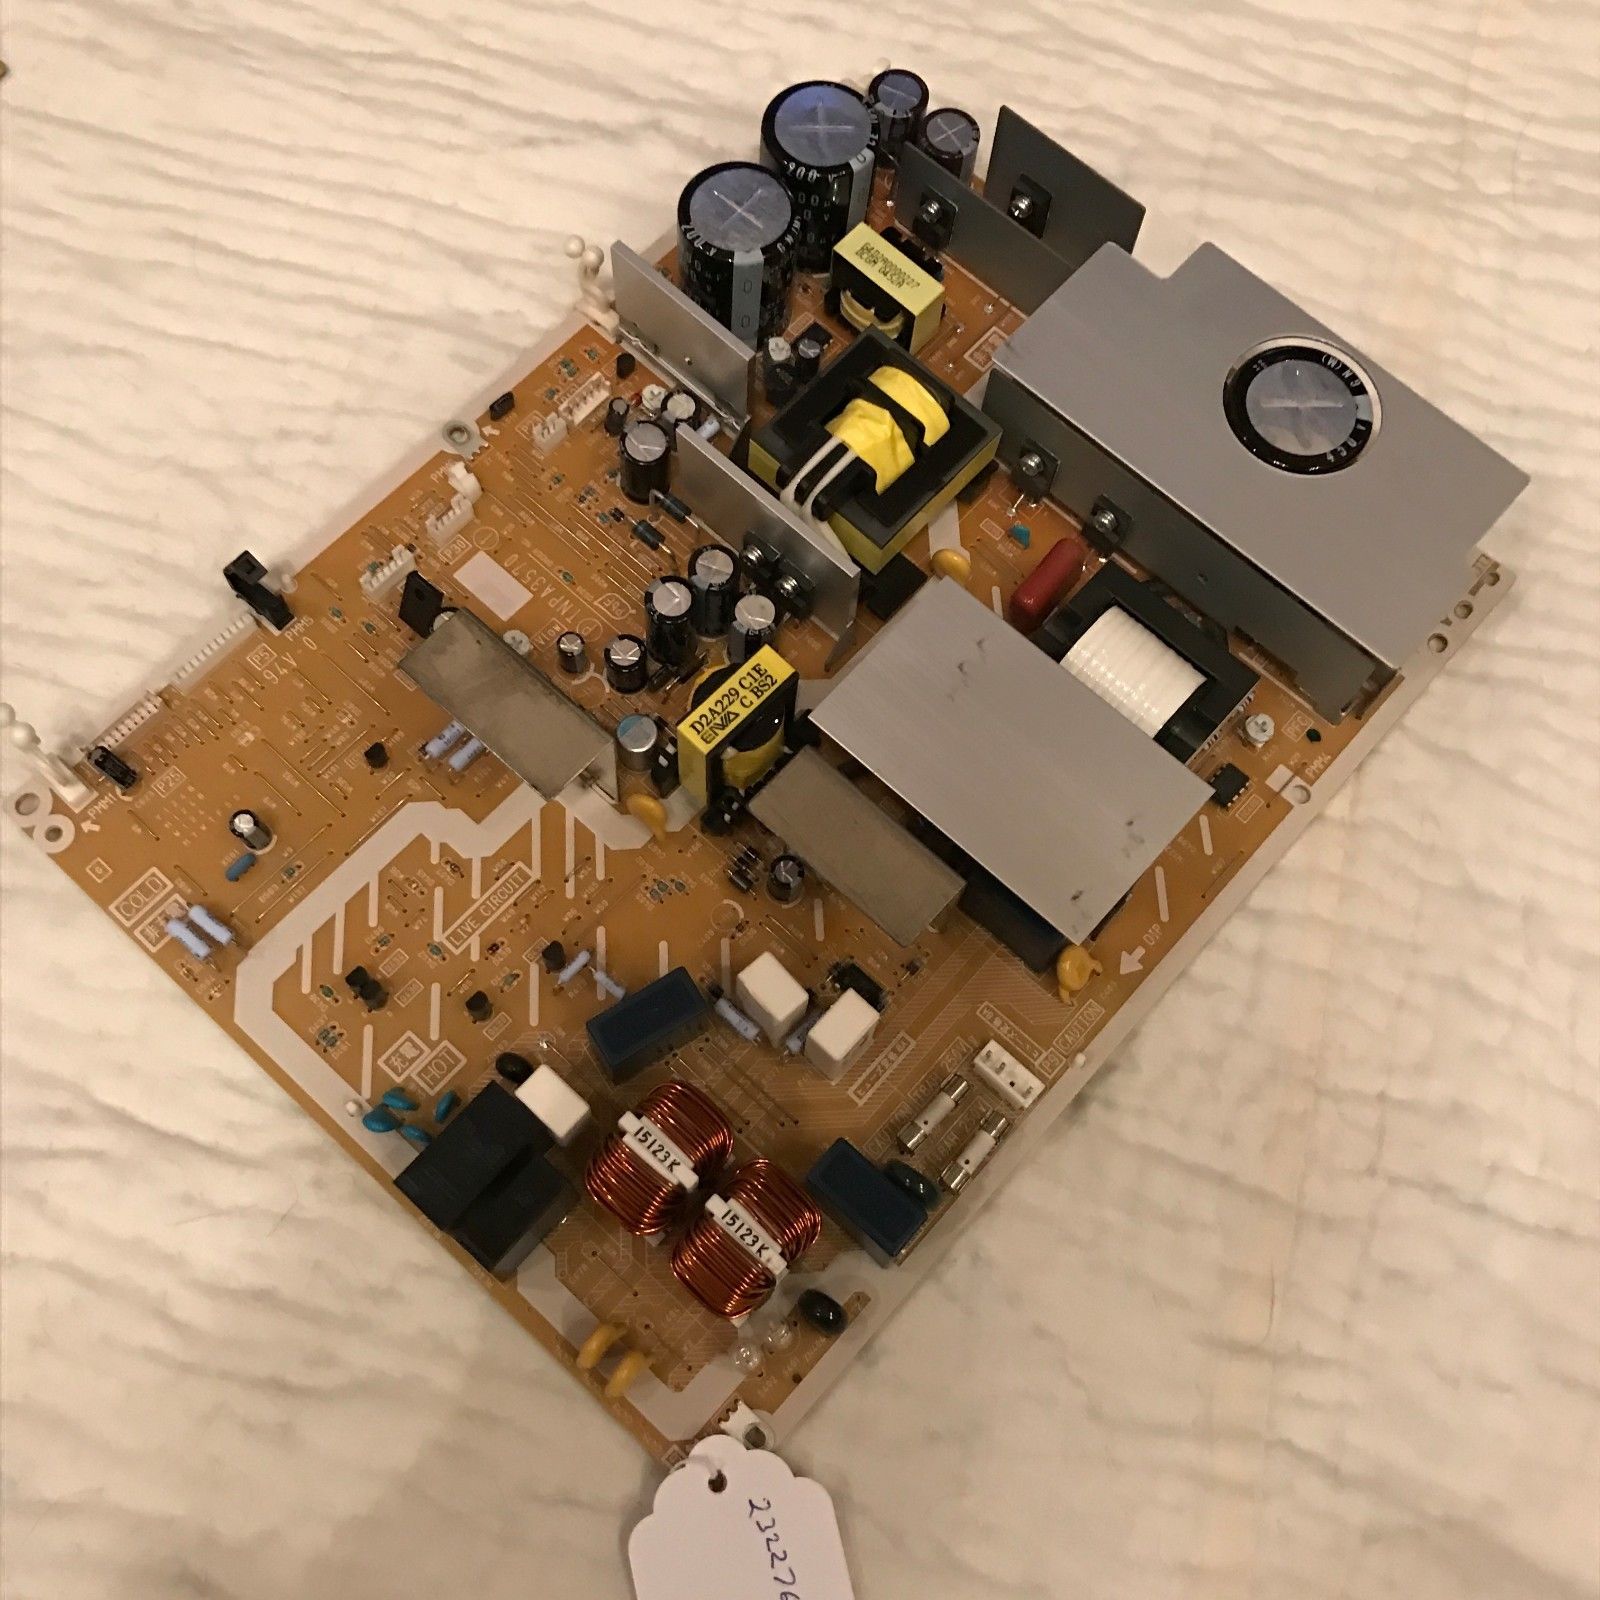 PANASONIC TNPA3570 POWER SUPPLY BOARD FOR TH-42PD50U AND OTHER MODEL